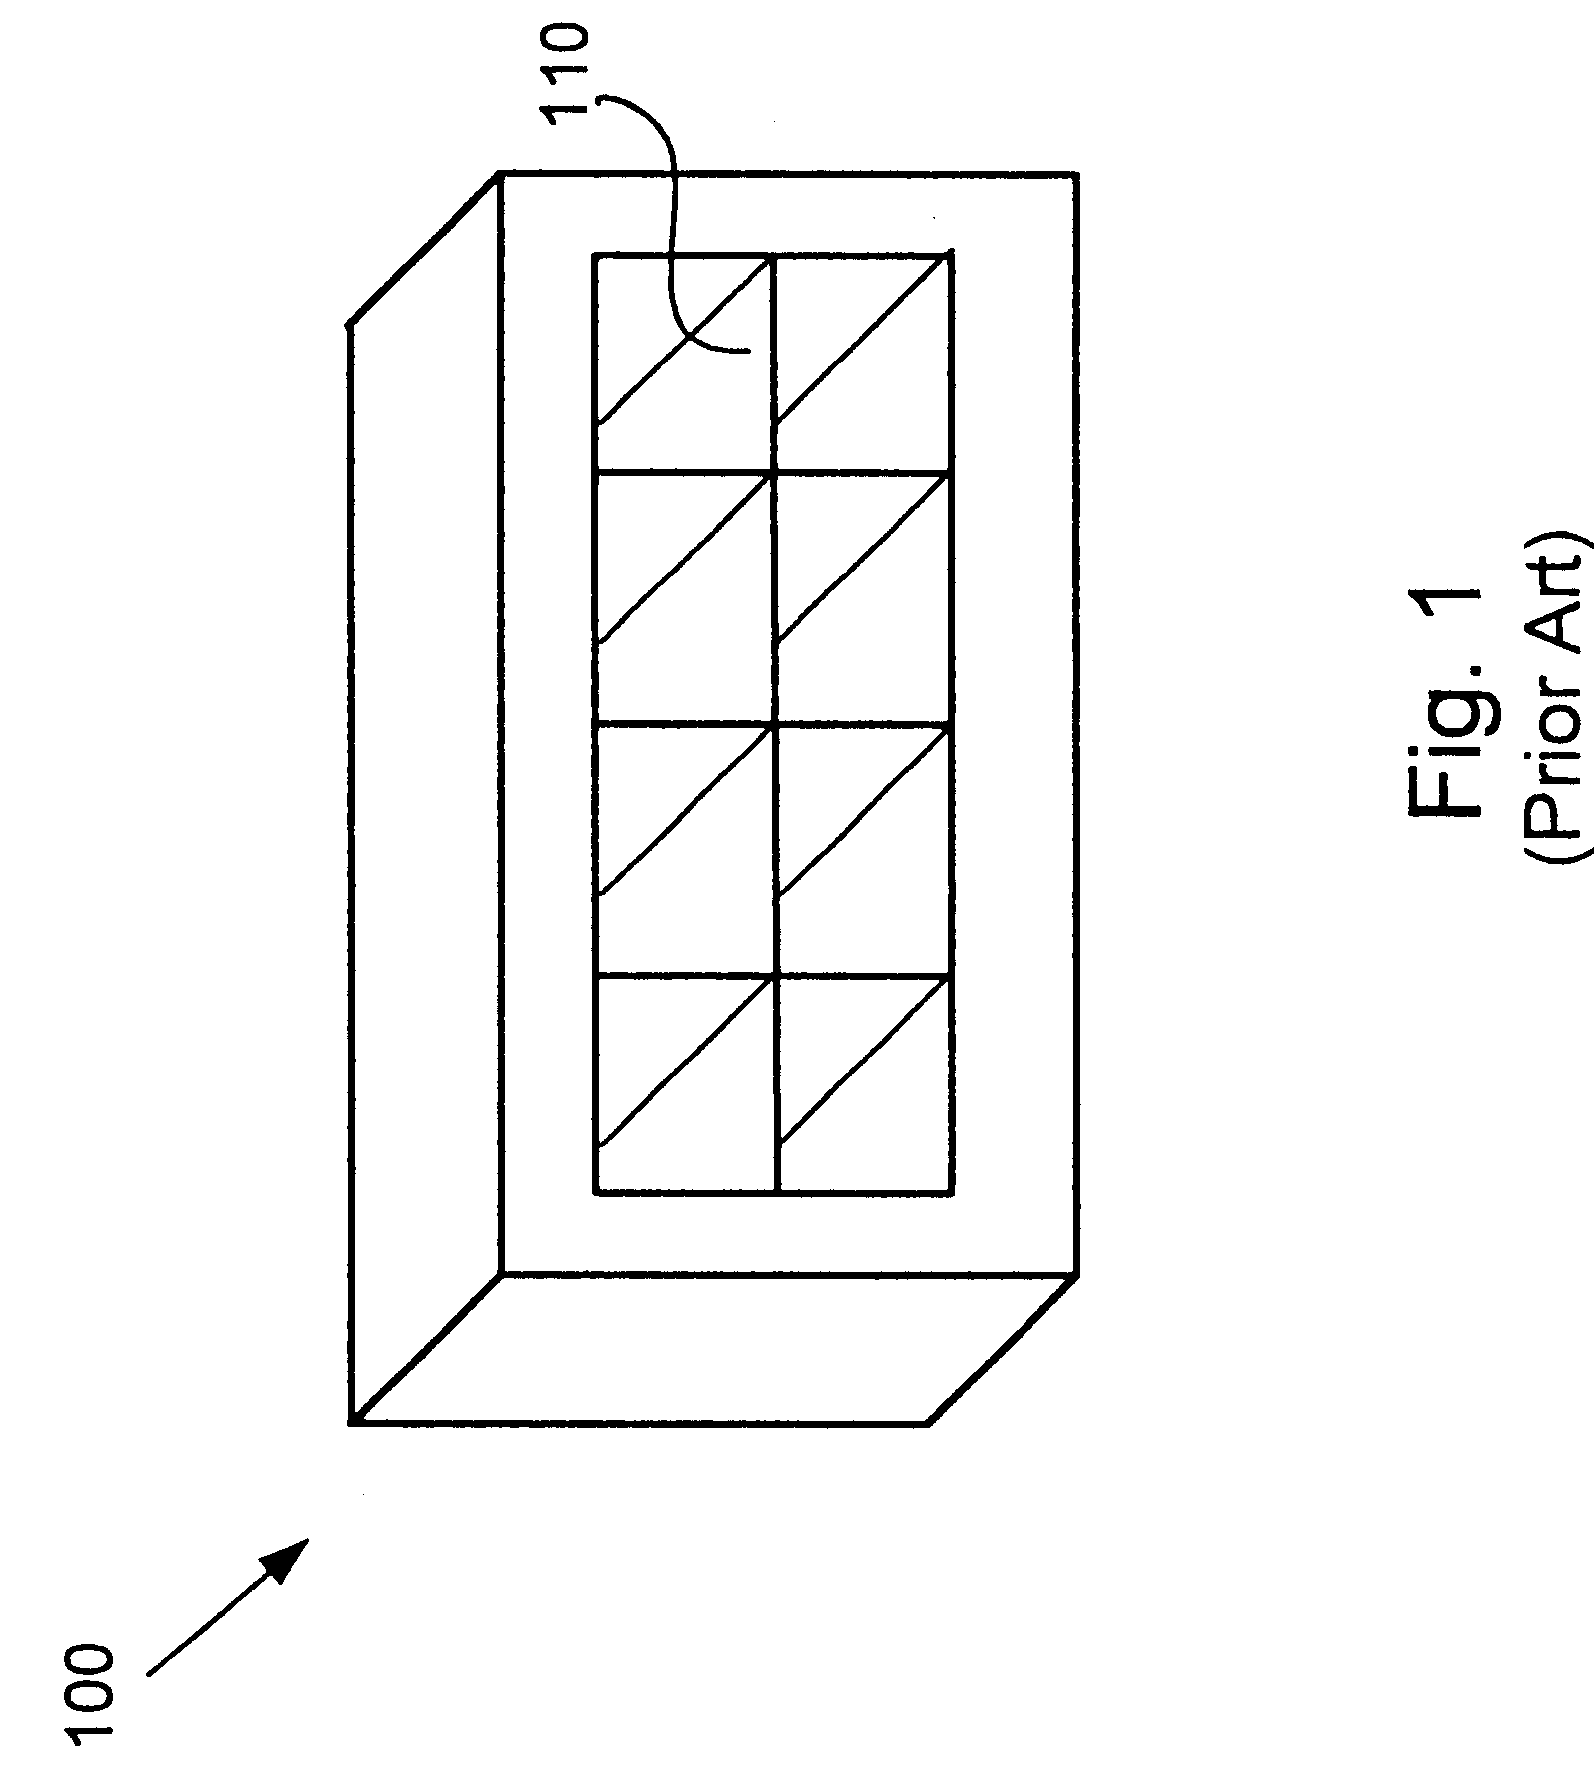 Circuit card captivation and ejection mechanism including a lever to facilitate removal of the mechanism from a housing